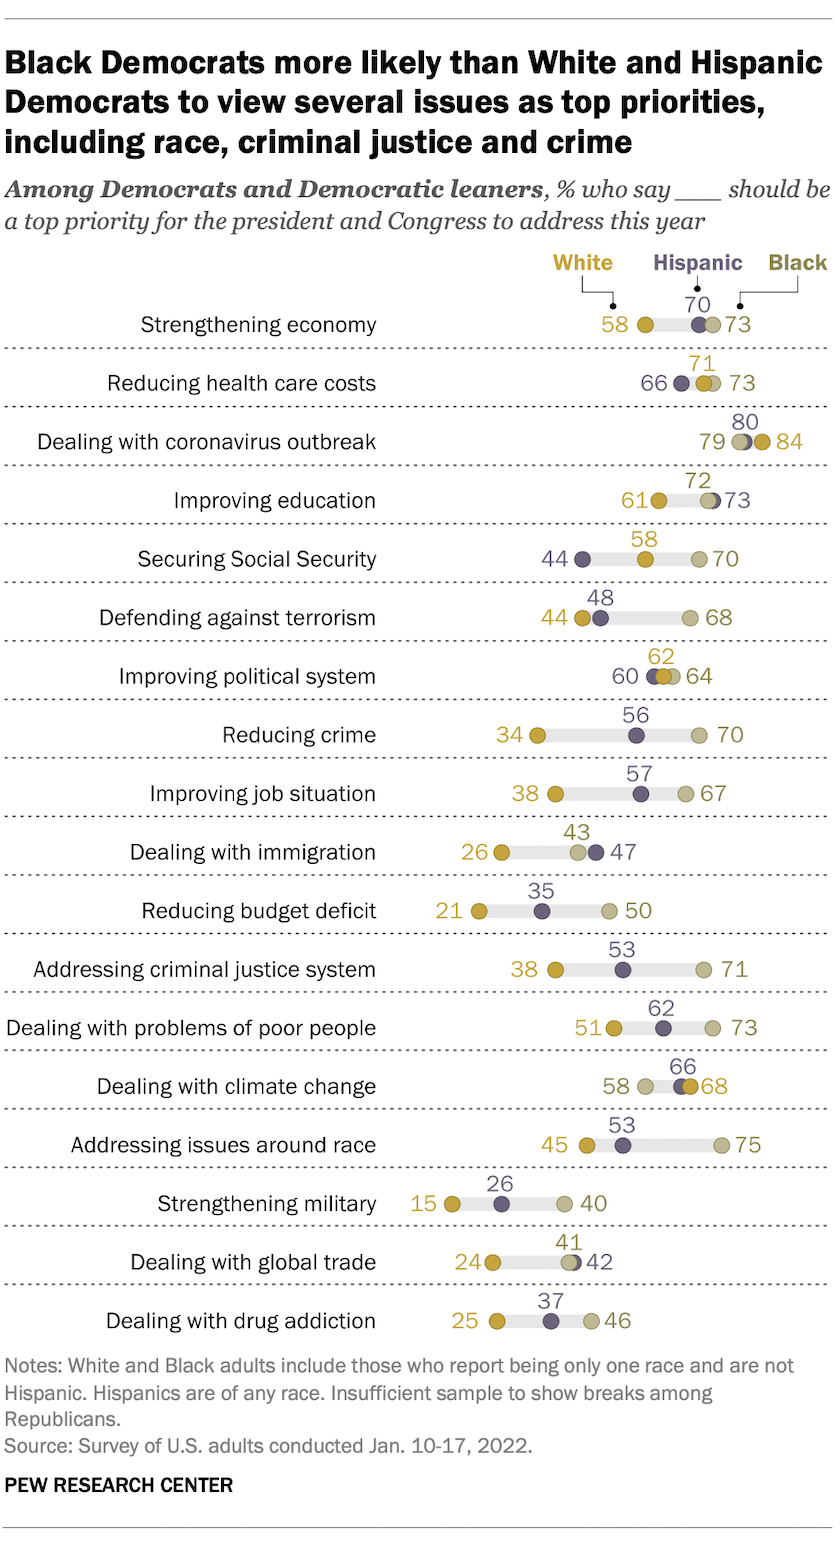 Black Democrats more likely than White and Hispanic Democrats to view several issues as top priorities, including race, criminal justice and crime 